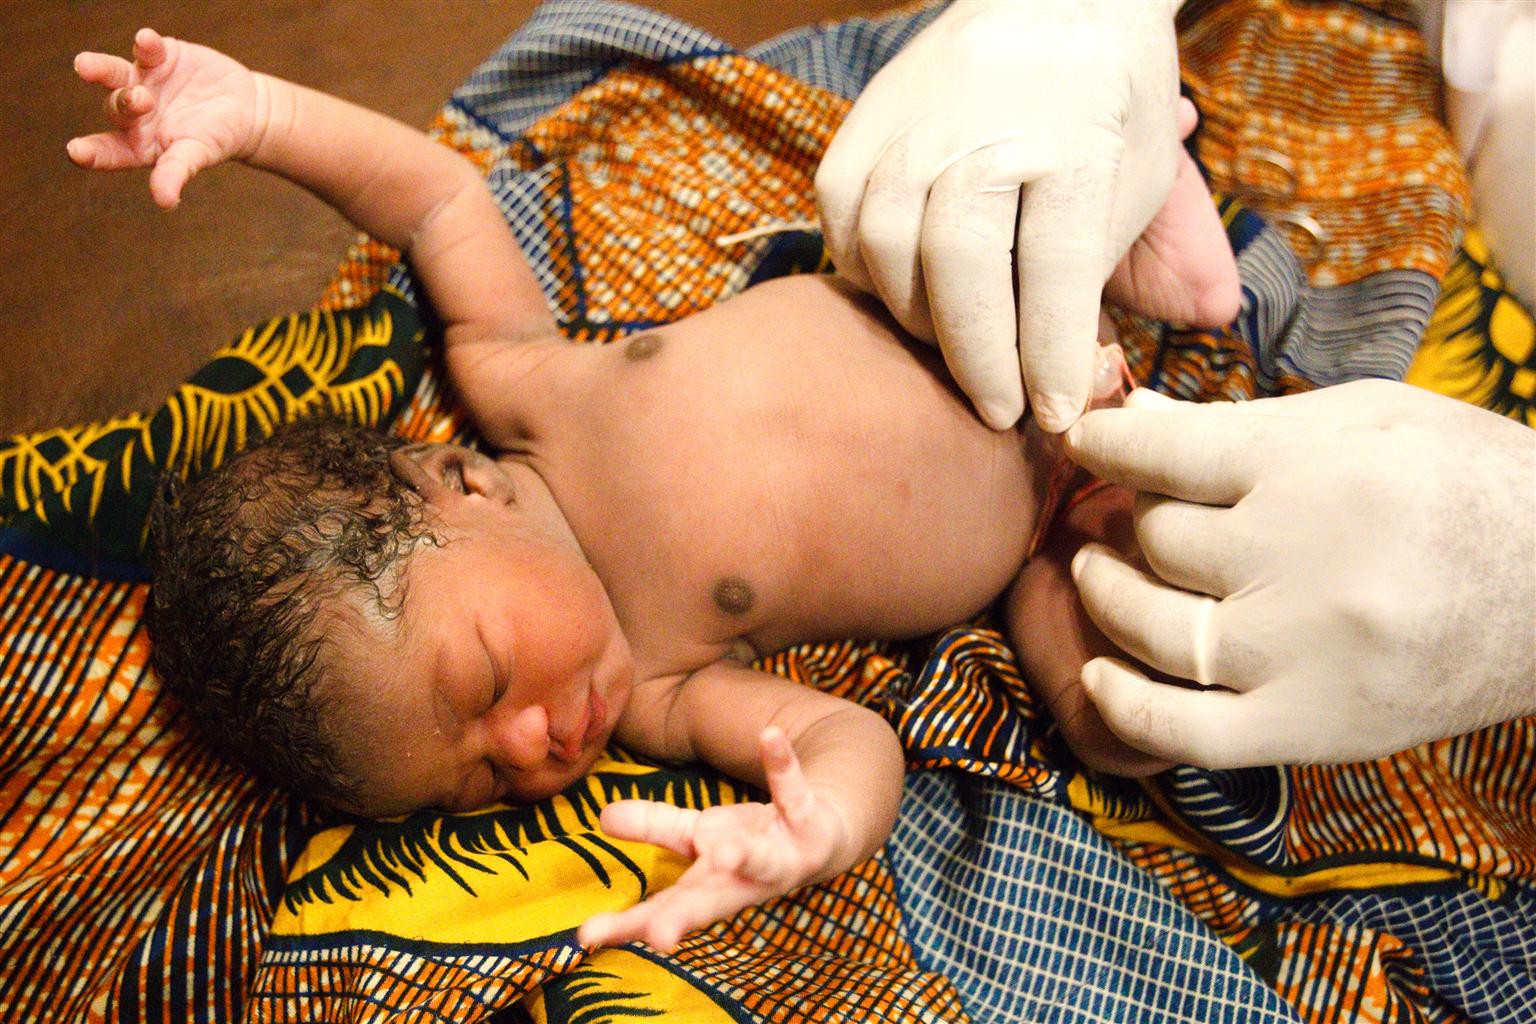 A health worker ties the umbilical cord of a newborn child who lies on a warming UNICEF-sponsored, locally-crafted warming table at the Kita reference health center in the town of Kita, Mali on Friday August 27, 2010.